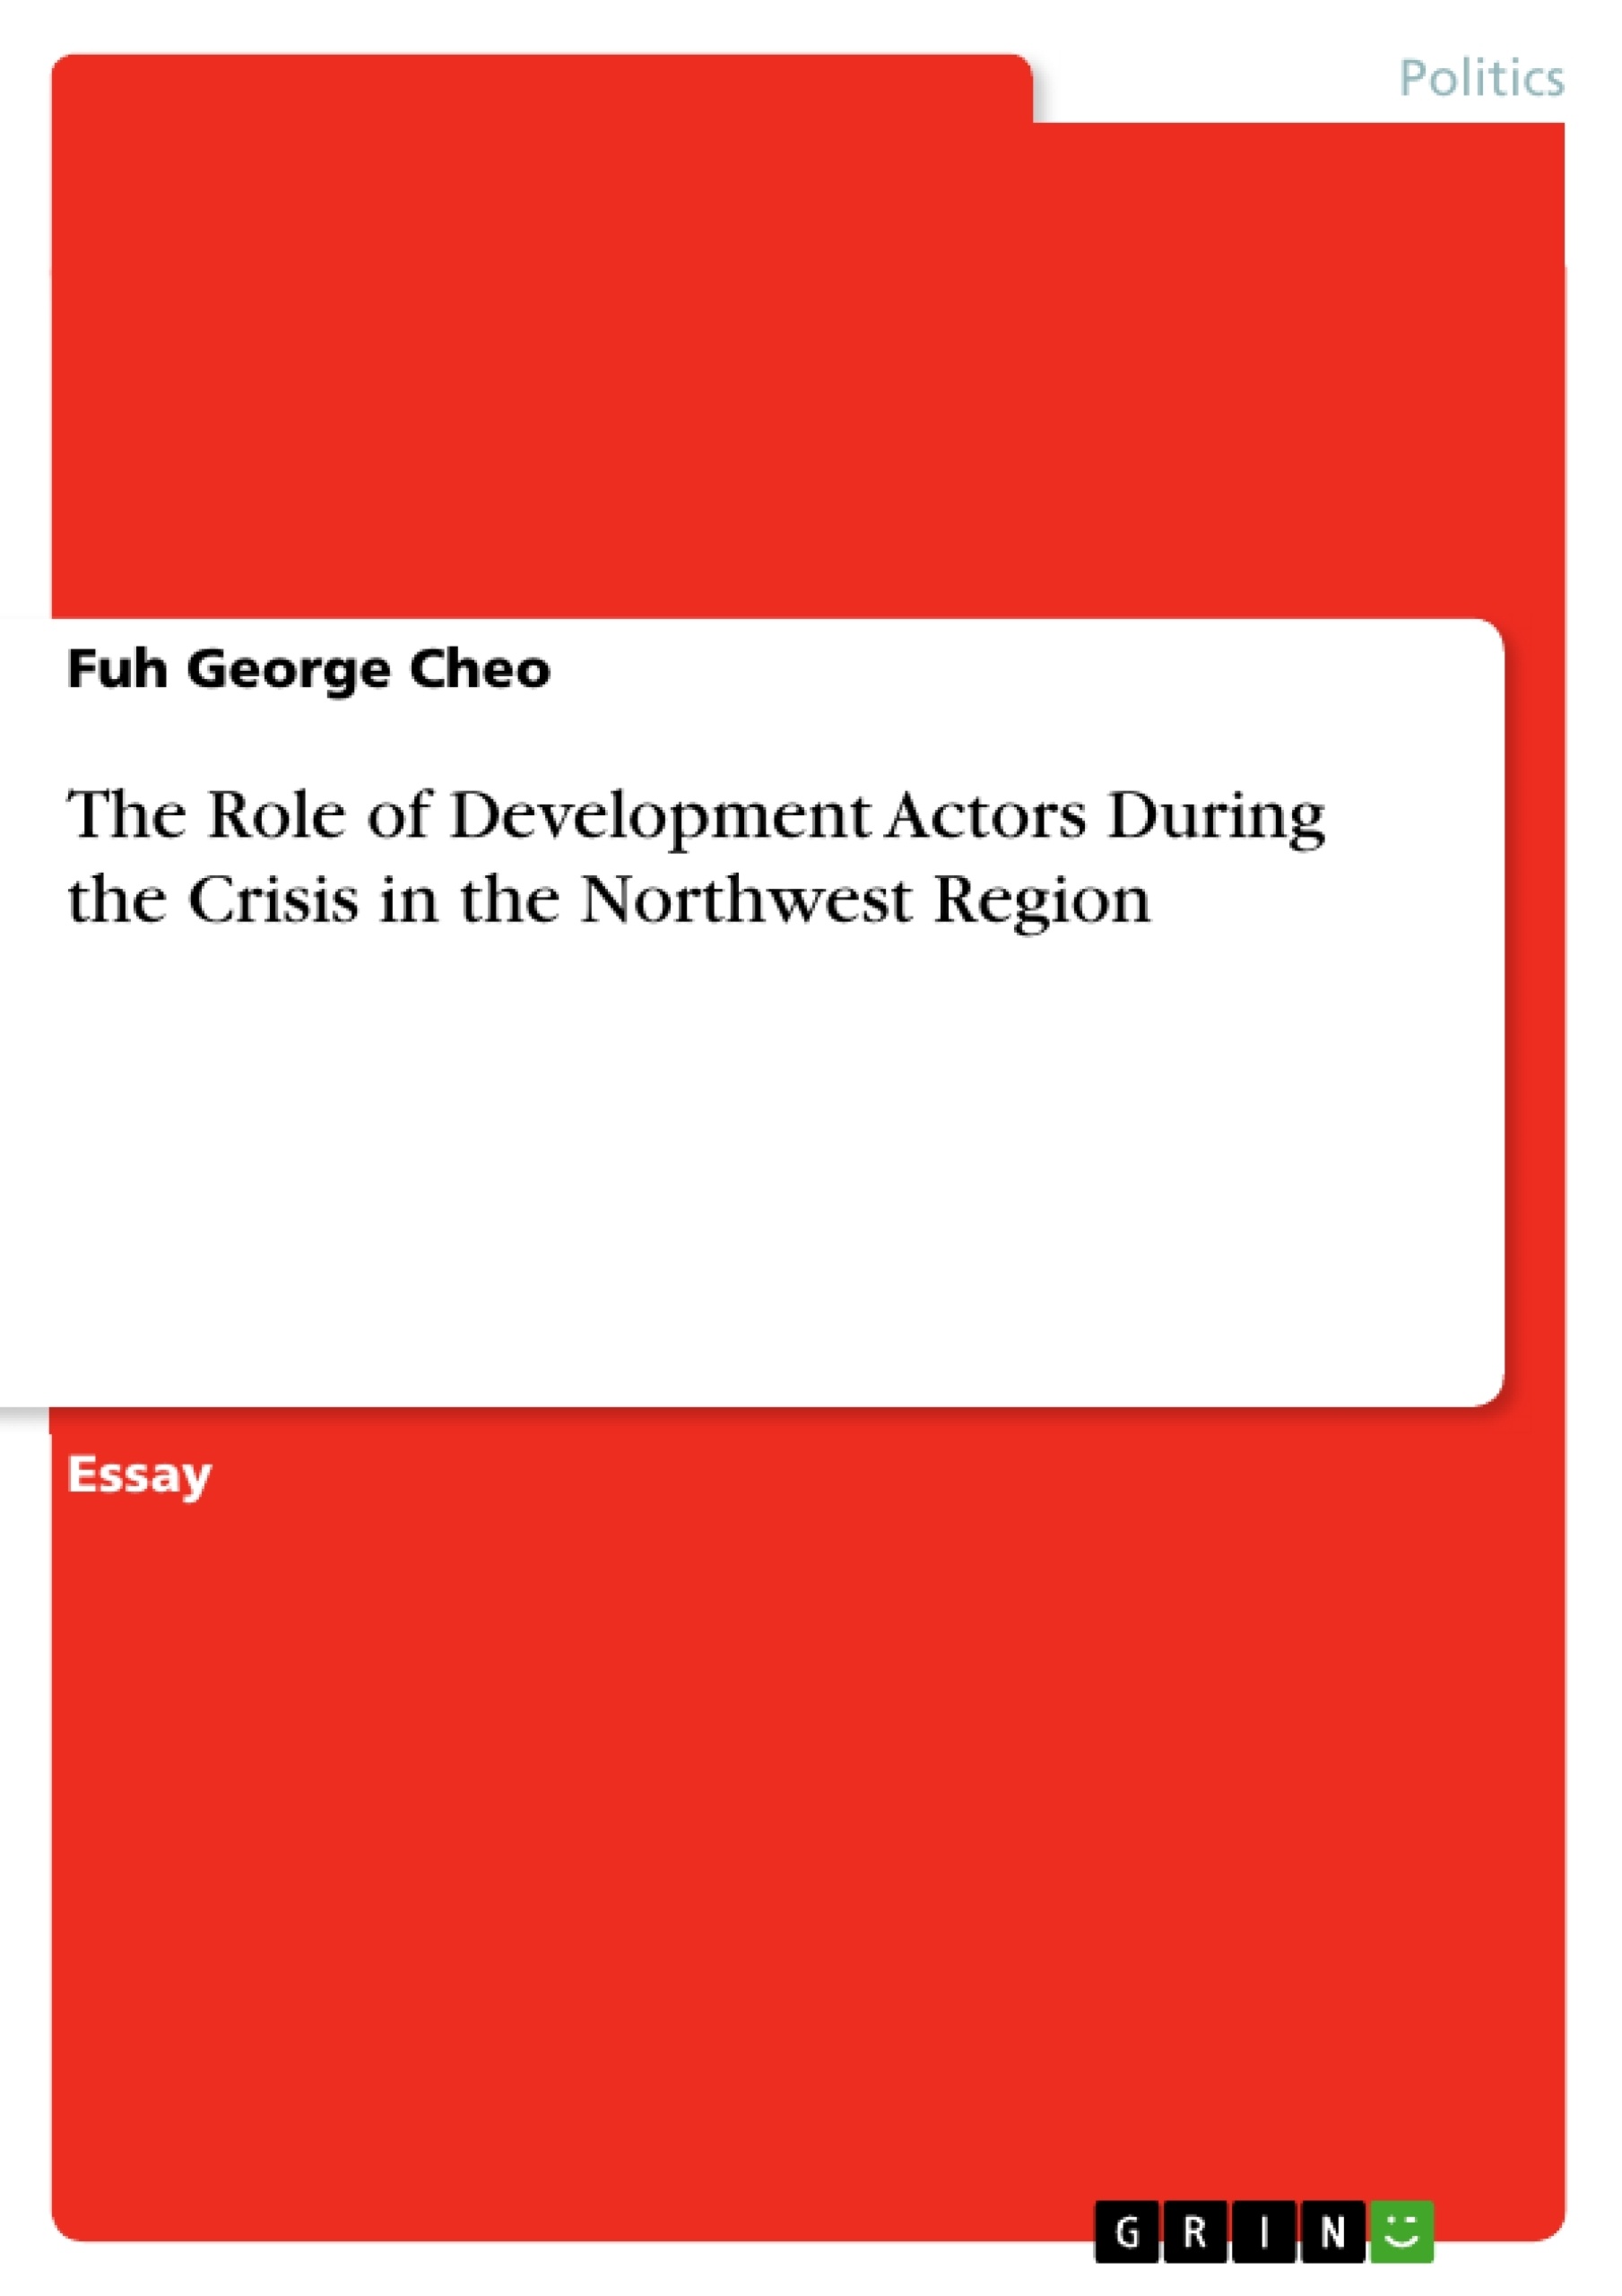 Title: The Role of Development Actors During the Crisis in the Northwest Region